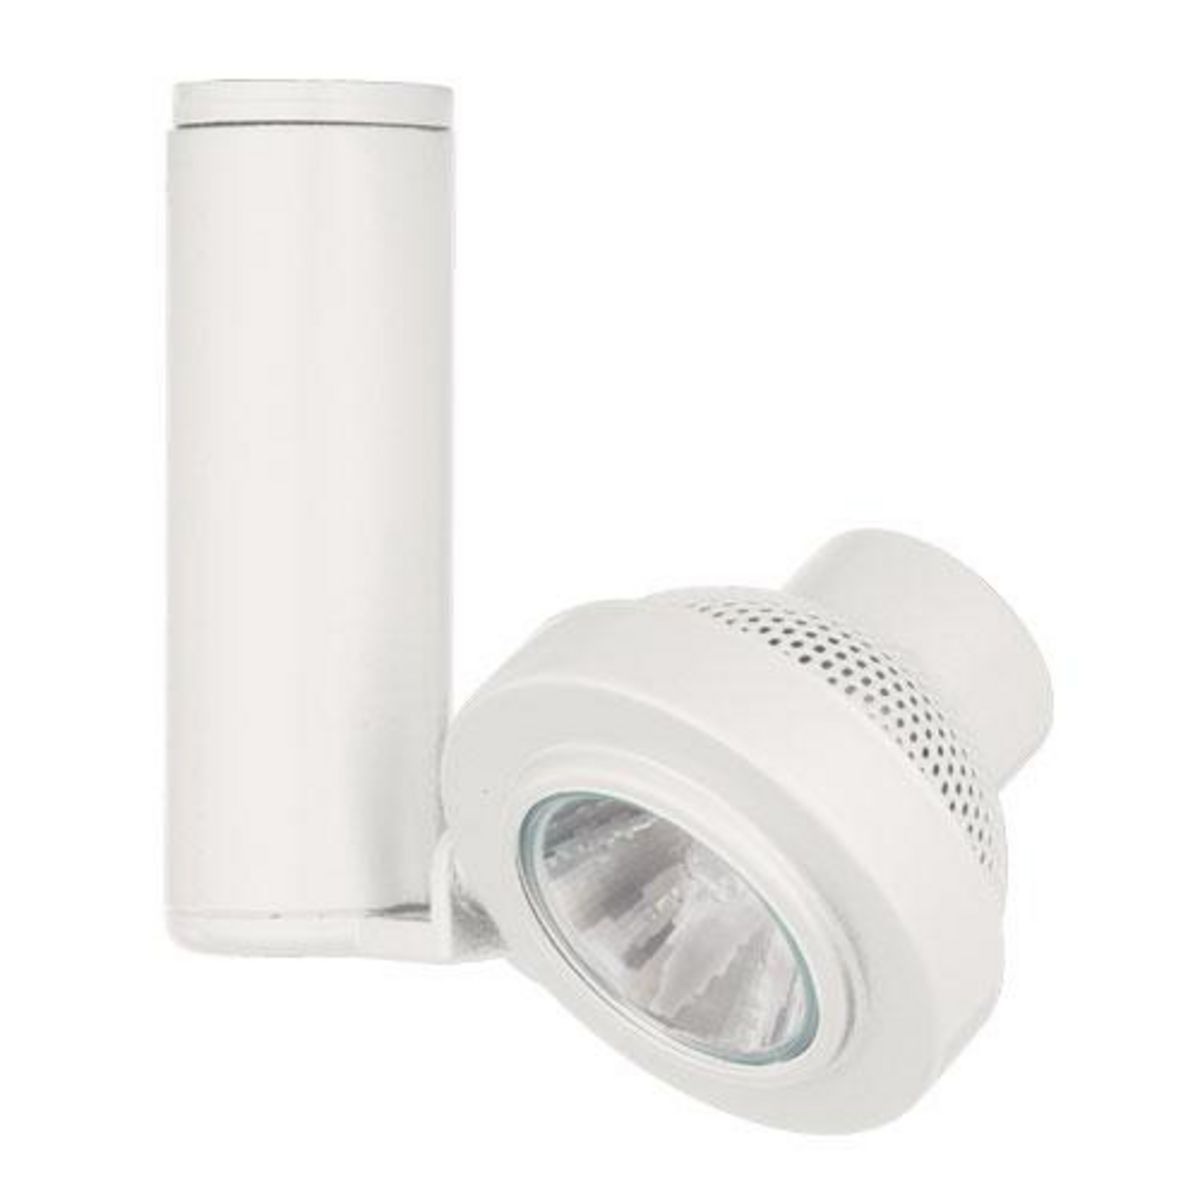 FIXT WHT GIMBAL RING 75W PAR36 OR AR111